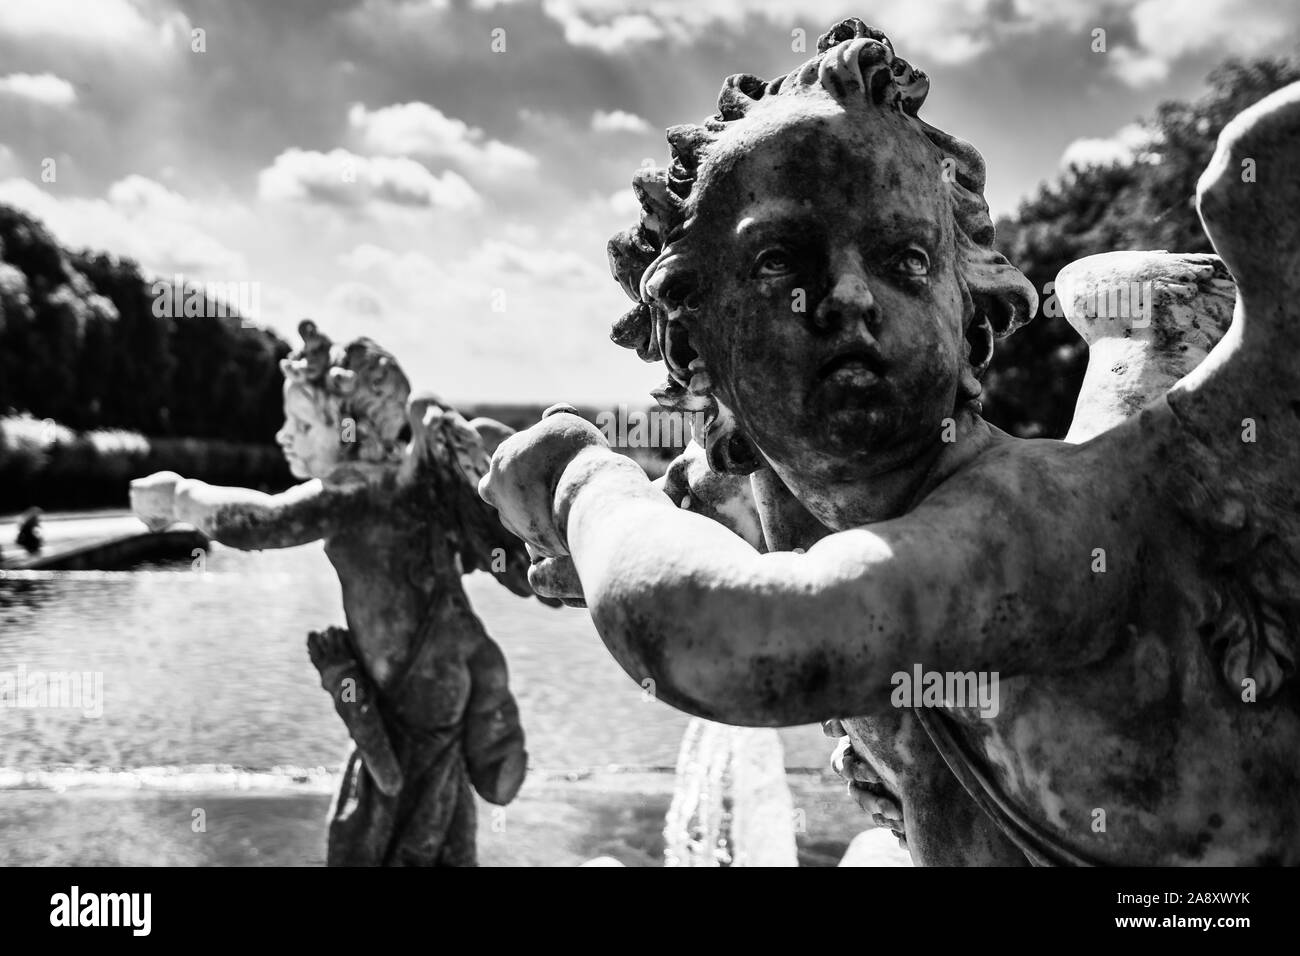 Black and white view of a statue of the Fountain of Venus and Adonis at Caserta Royal Palace, Campania, Italy, Campania, Italy Stock Photo